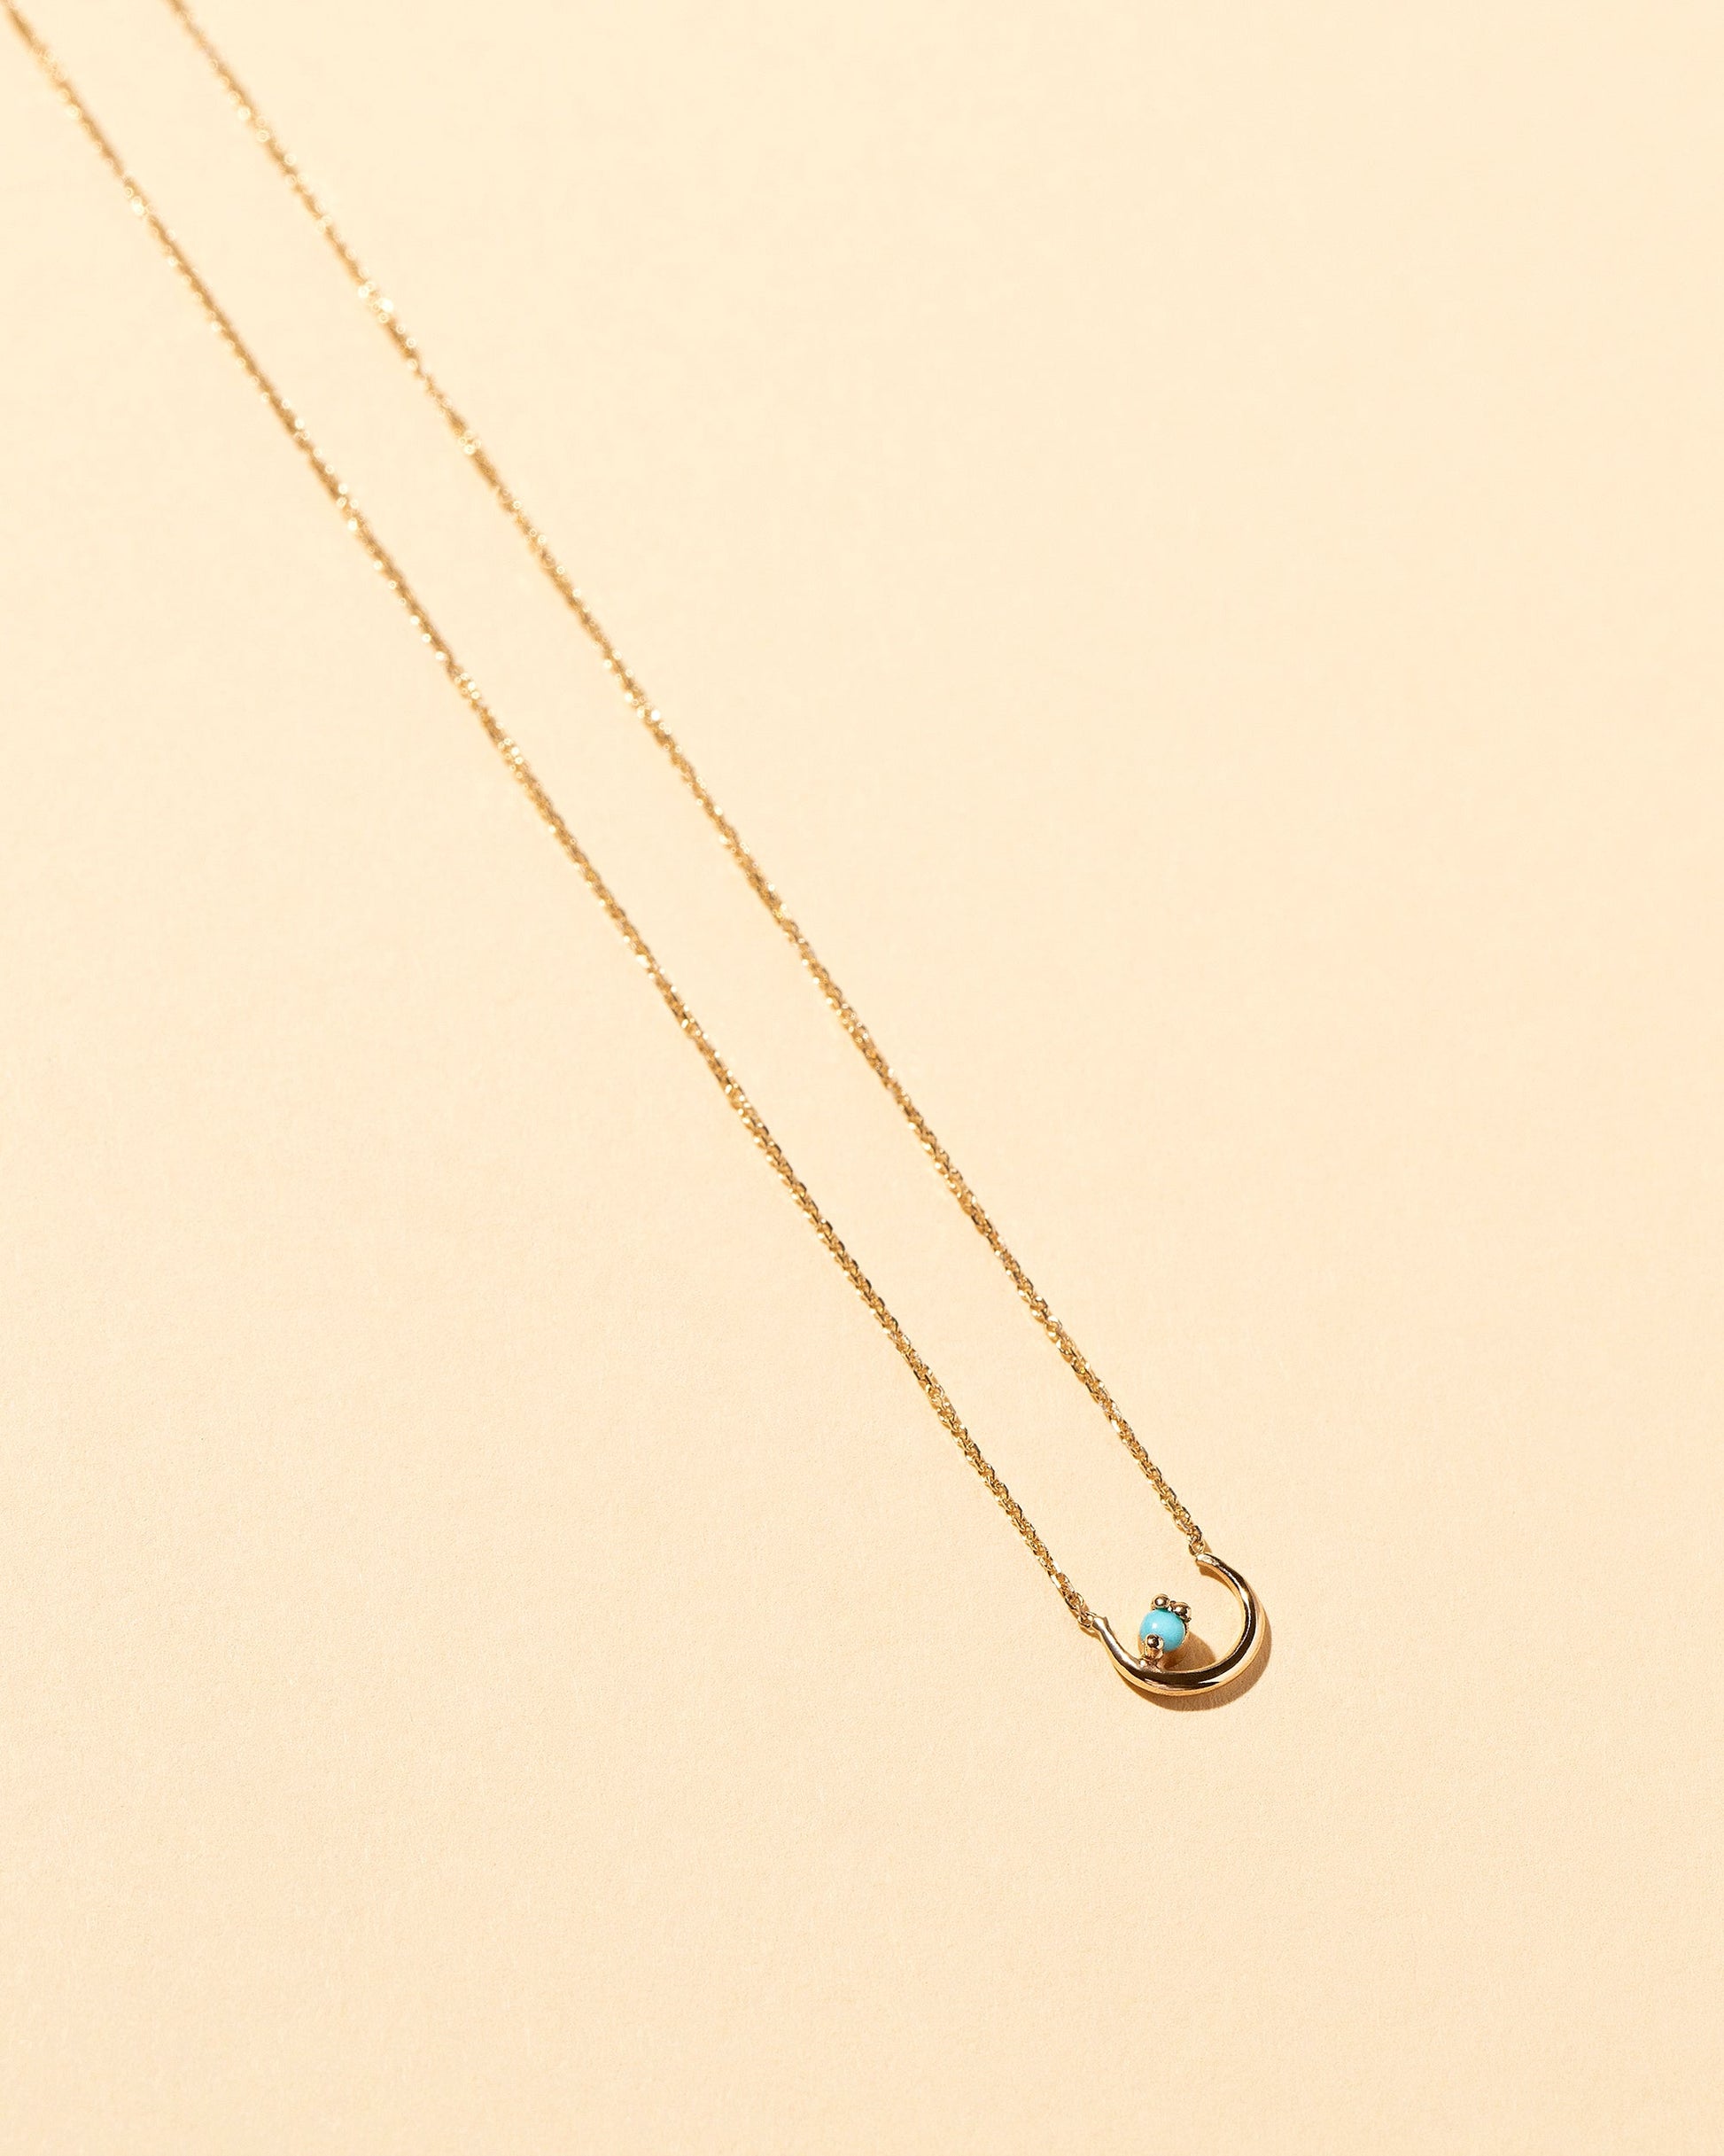  Moon Ray Necklace on light color background.